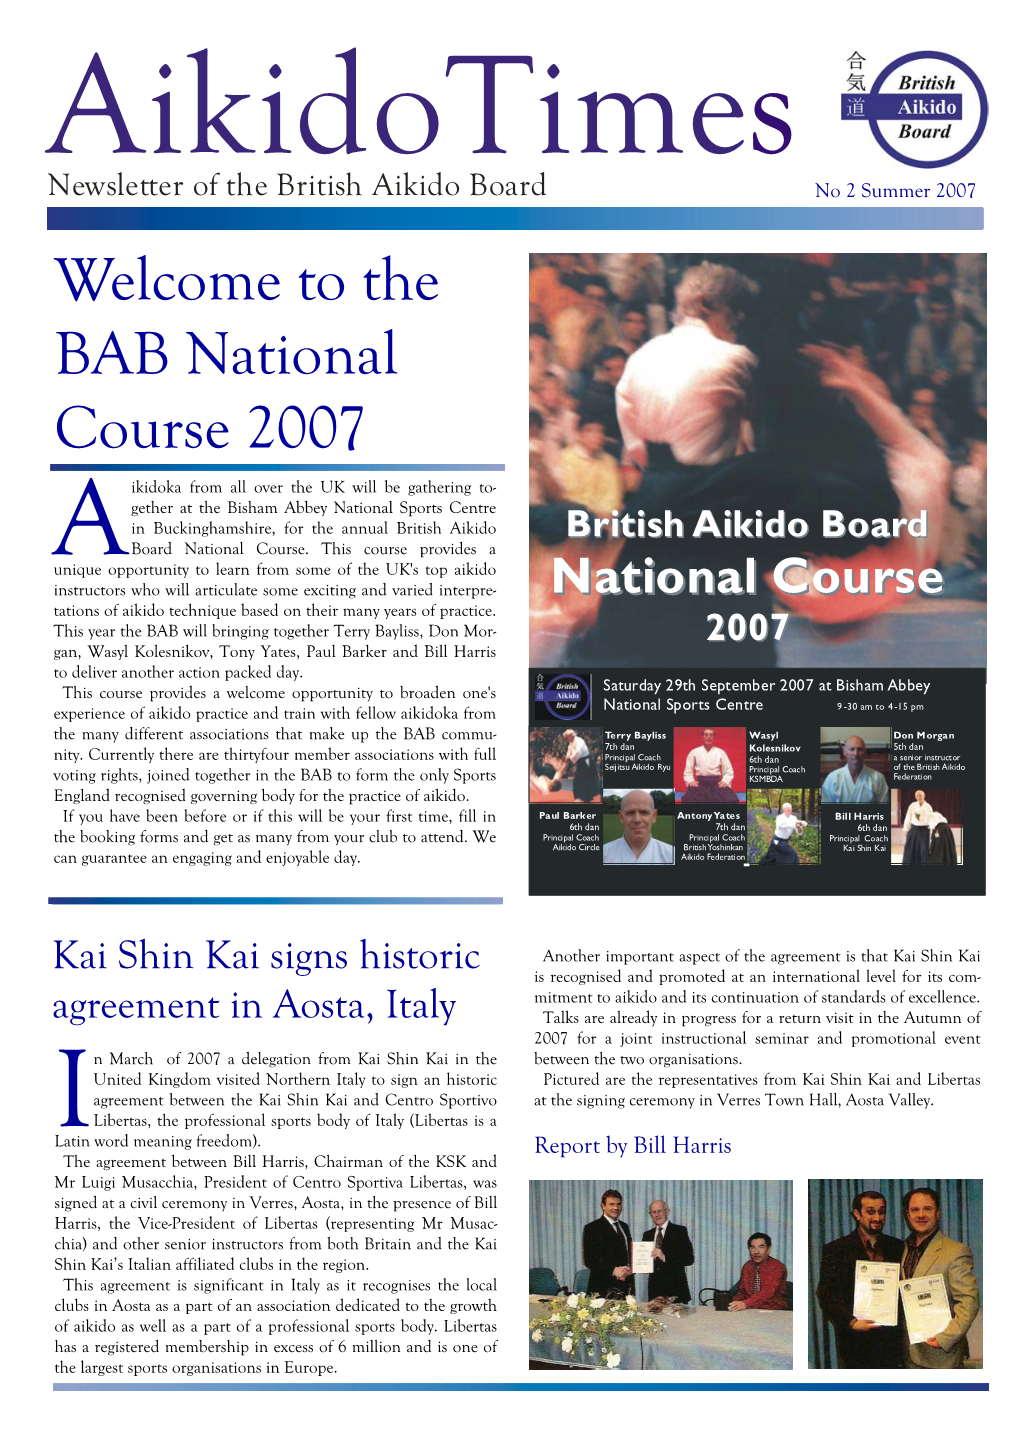 Welcome to the BAB National Course 2007